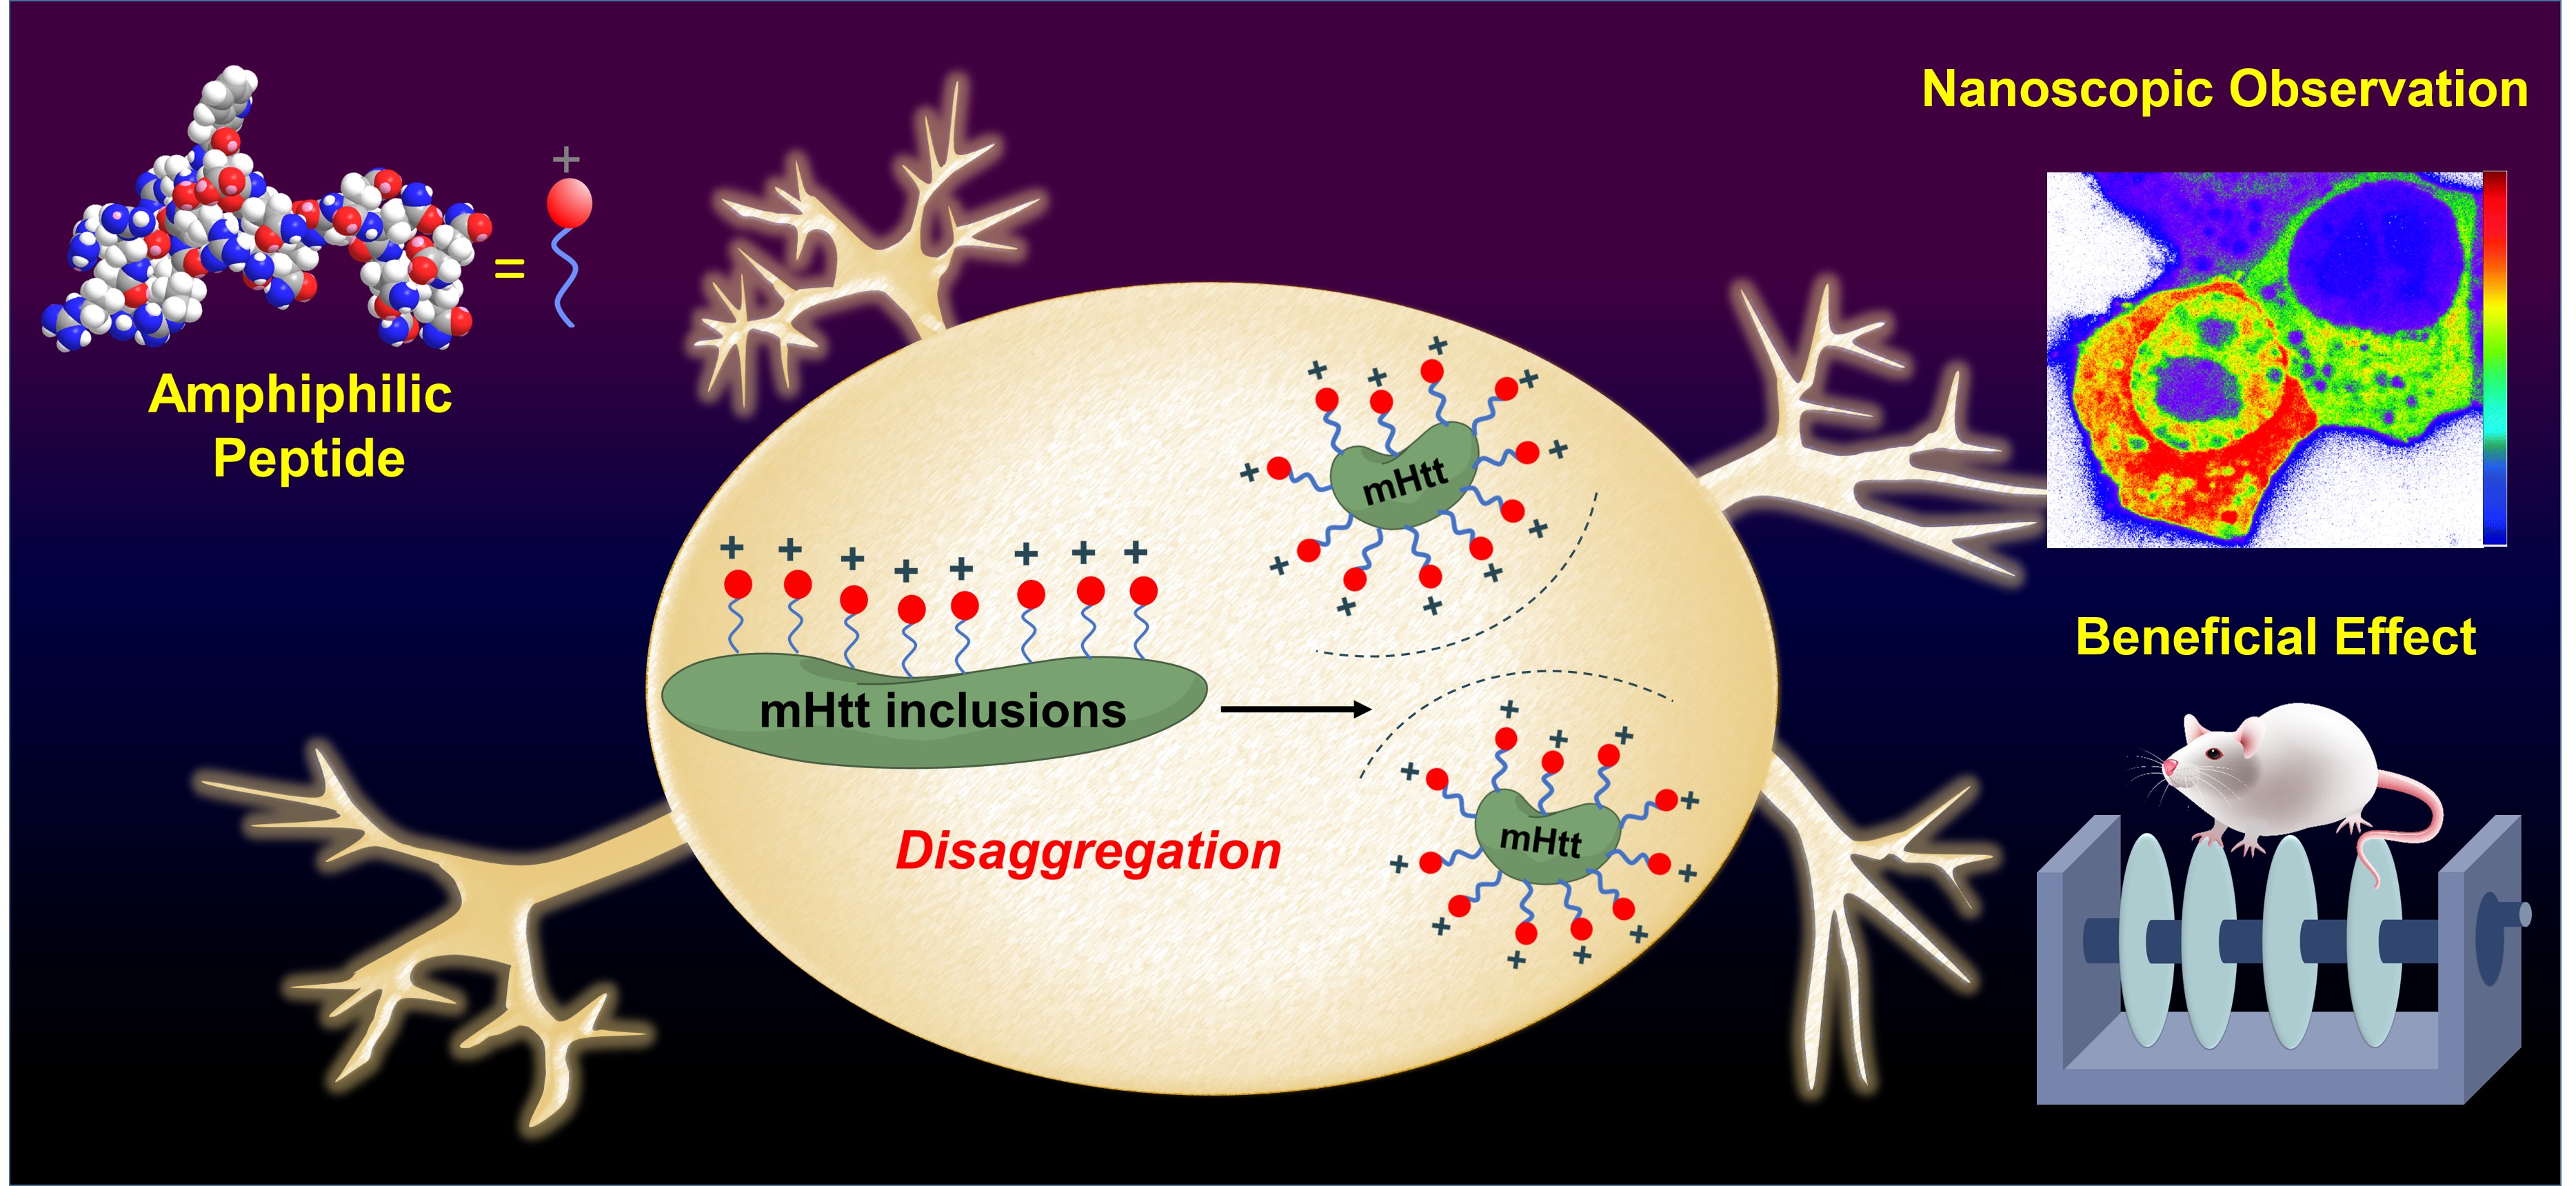 Figure 1. The amphiphilic peptide can perturb the oligomer assembly of mHtt through the charge repulsion, ameliorate mHtt-induced neurological damage, and rescue the memory deficit.